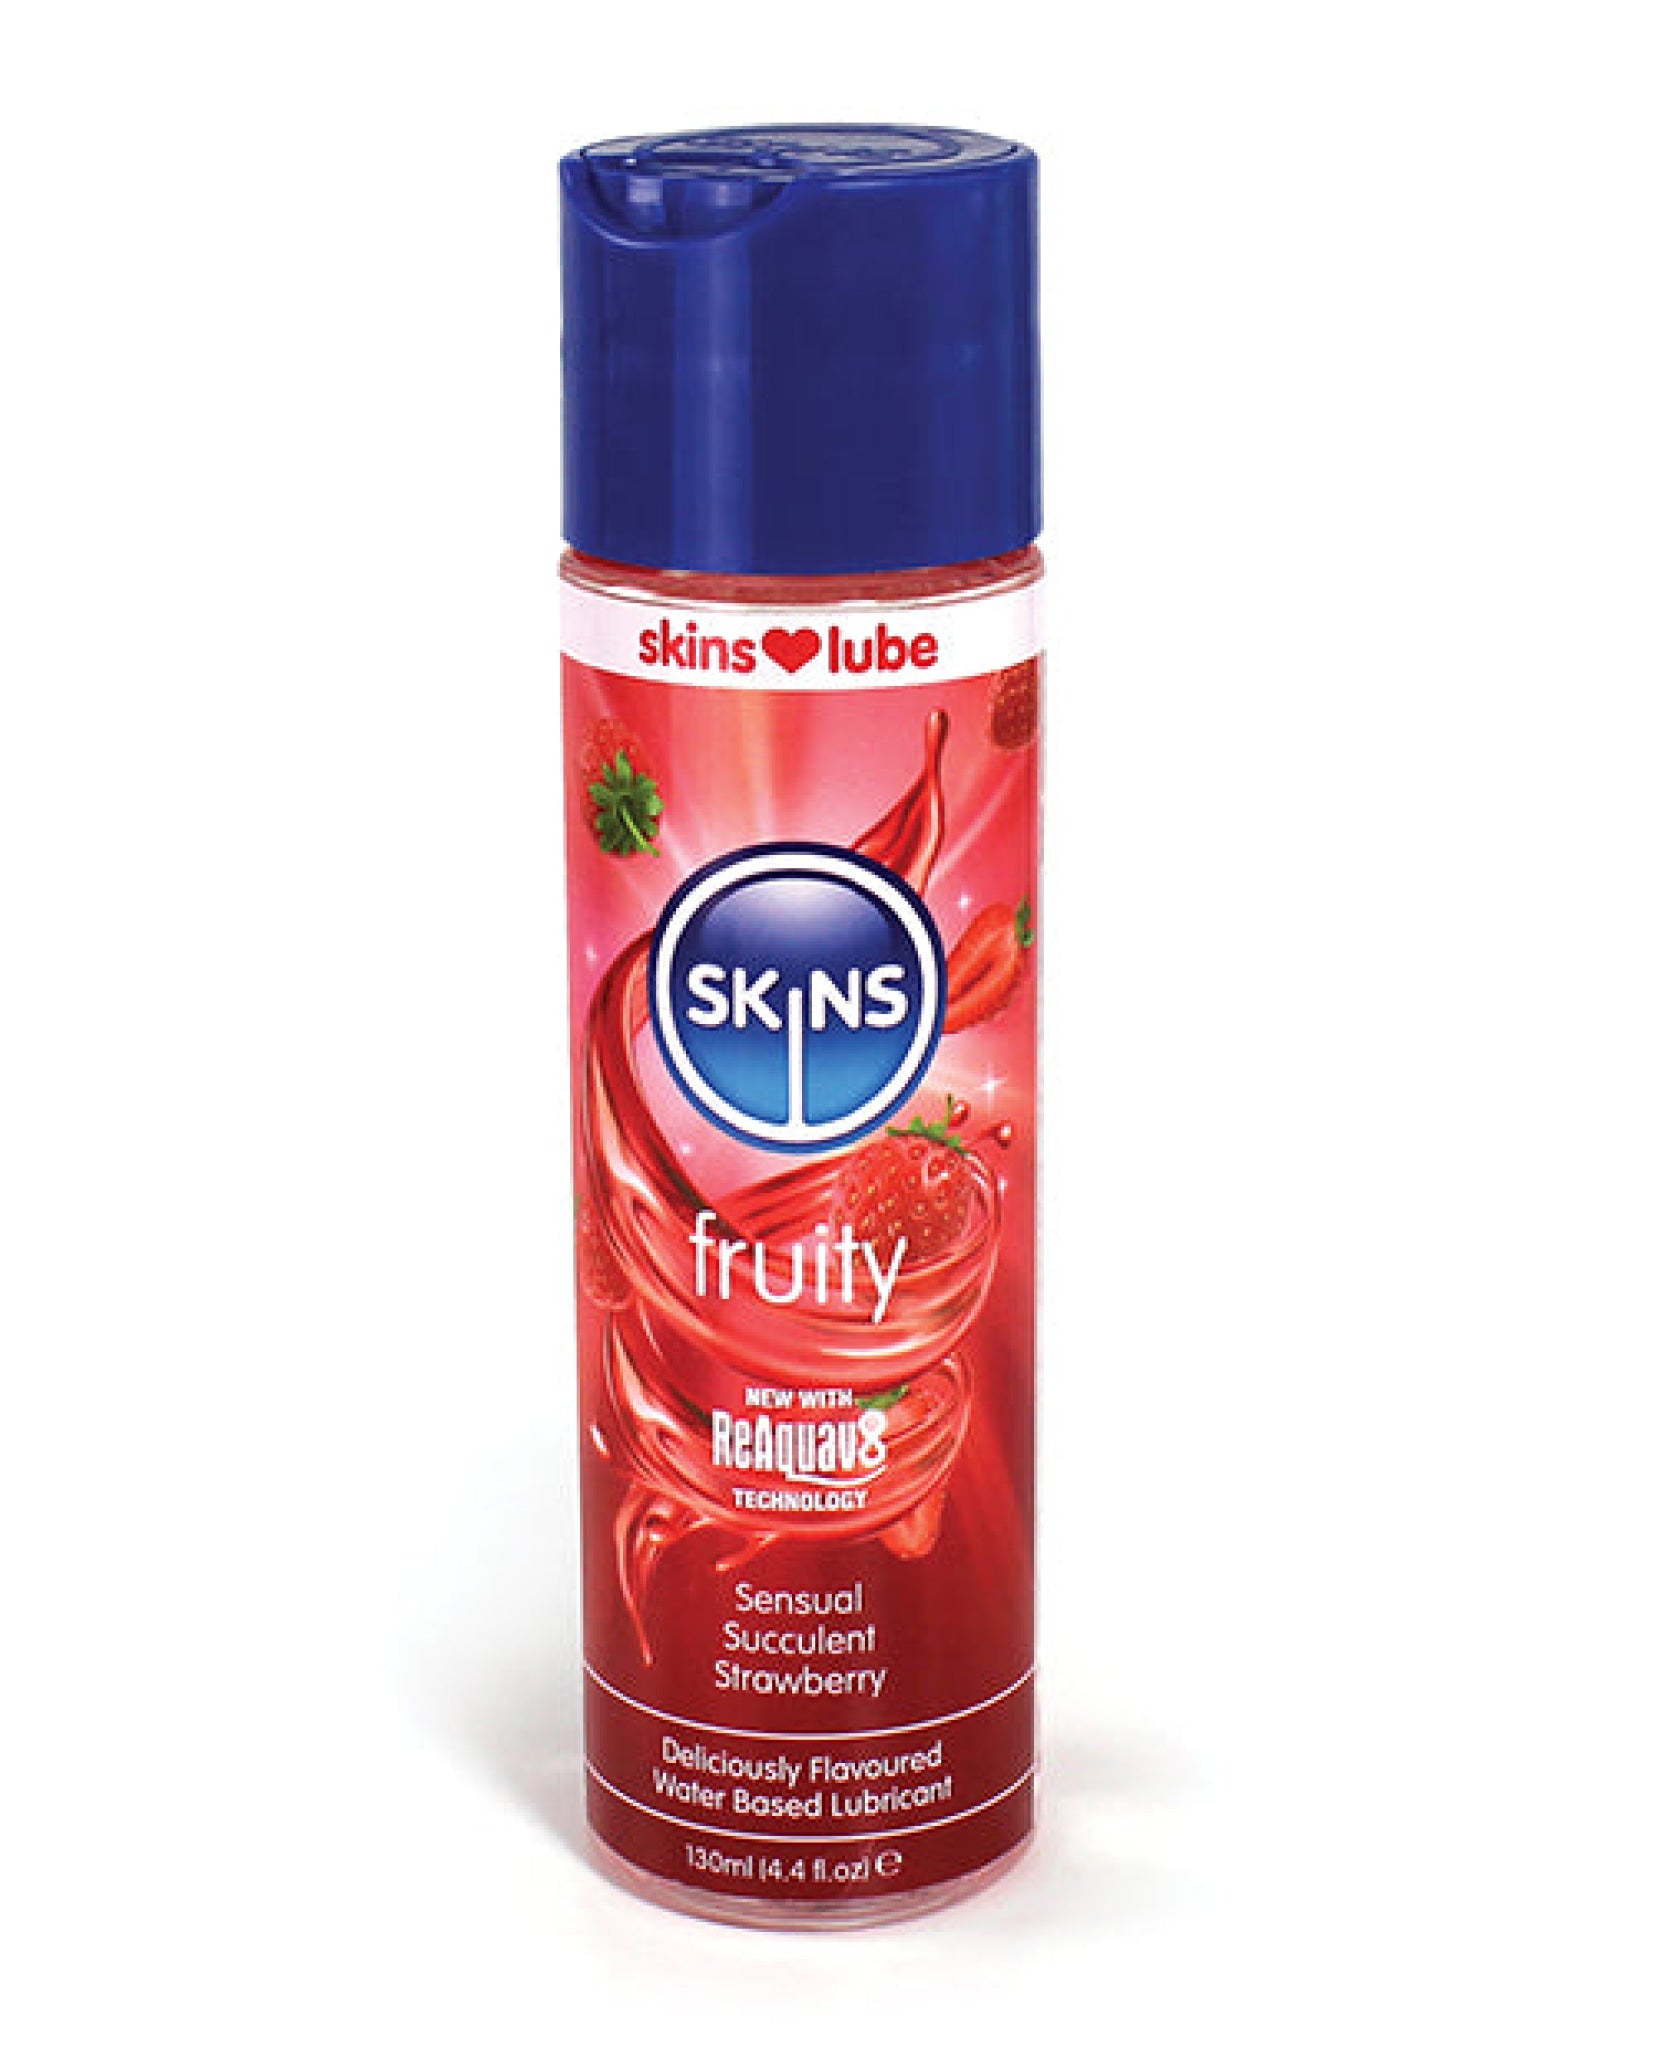 Skins Water Based Lubricant - 4.4 Oz Creative Conceptions